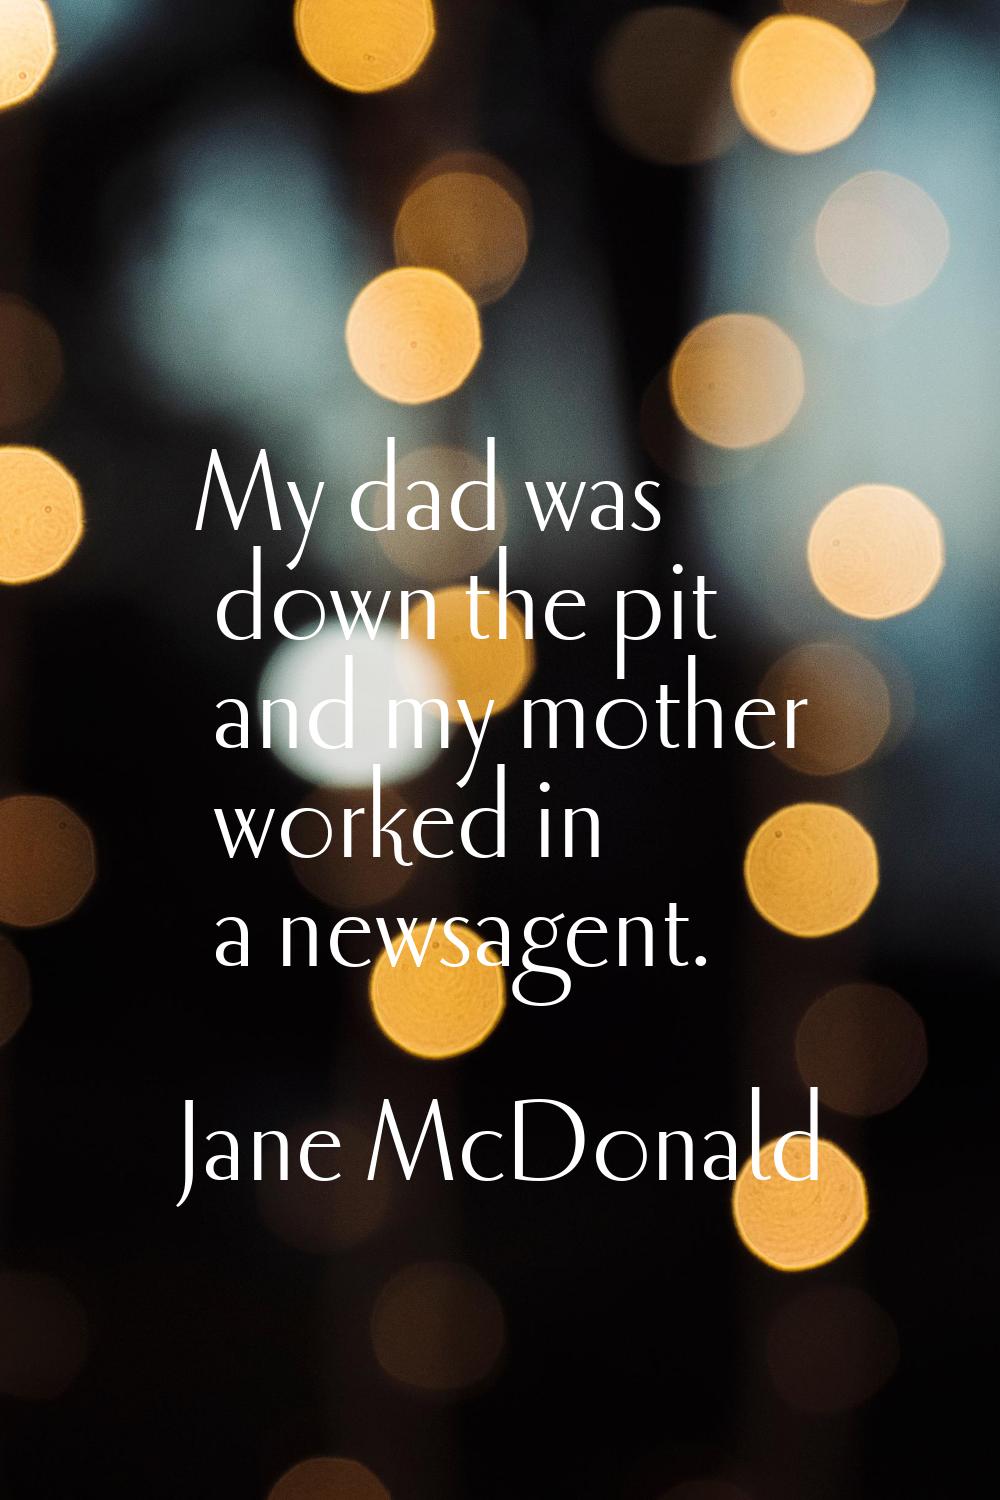 My dad was down the pit and my mother worked in a newsagent.